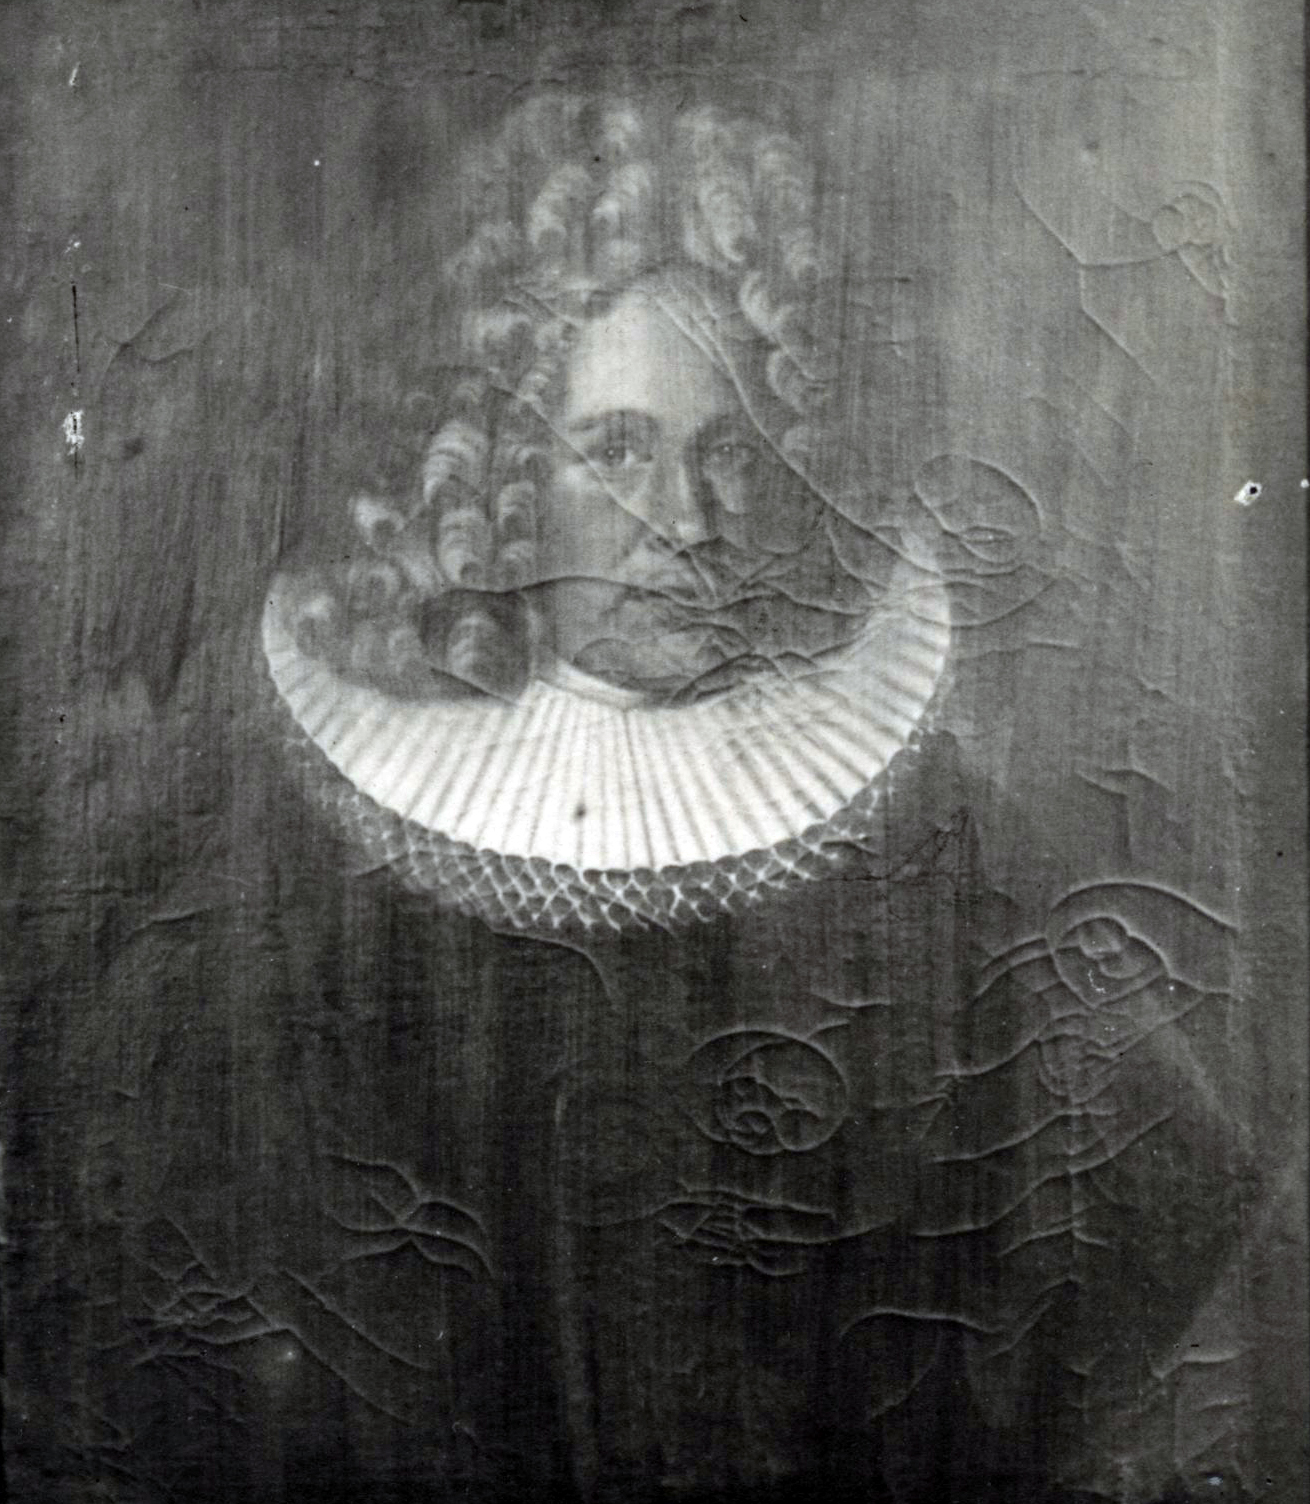 a portrait with embellishments in the middle of it